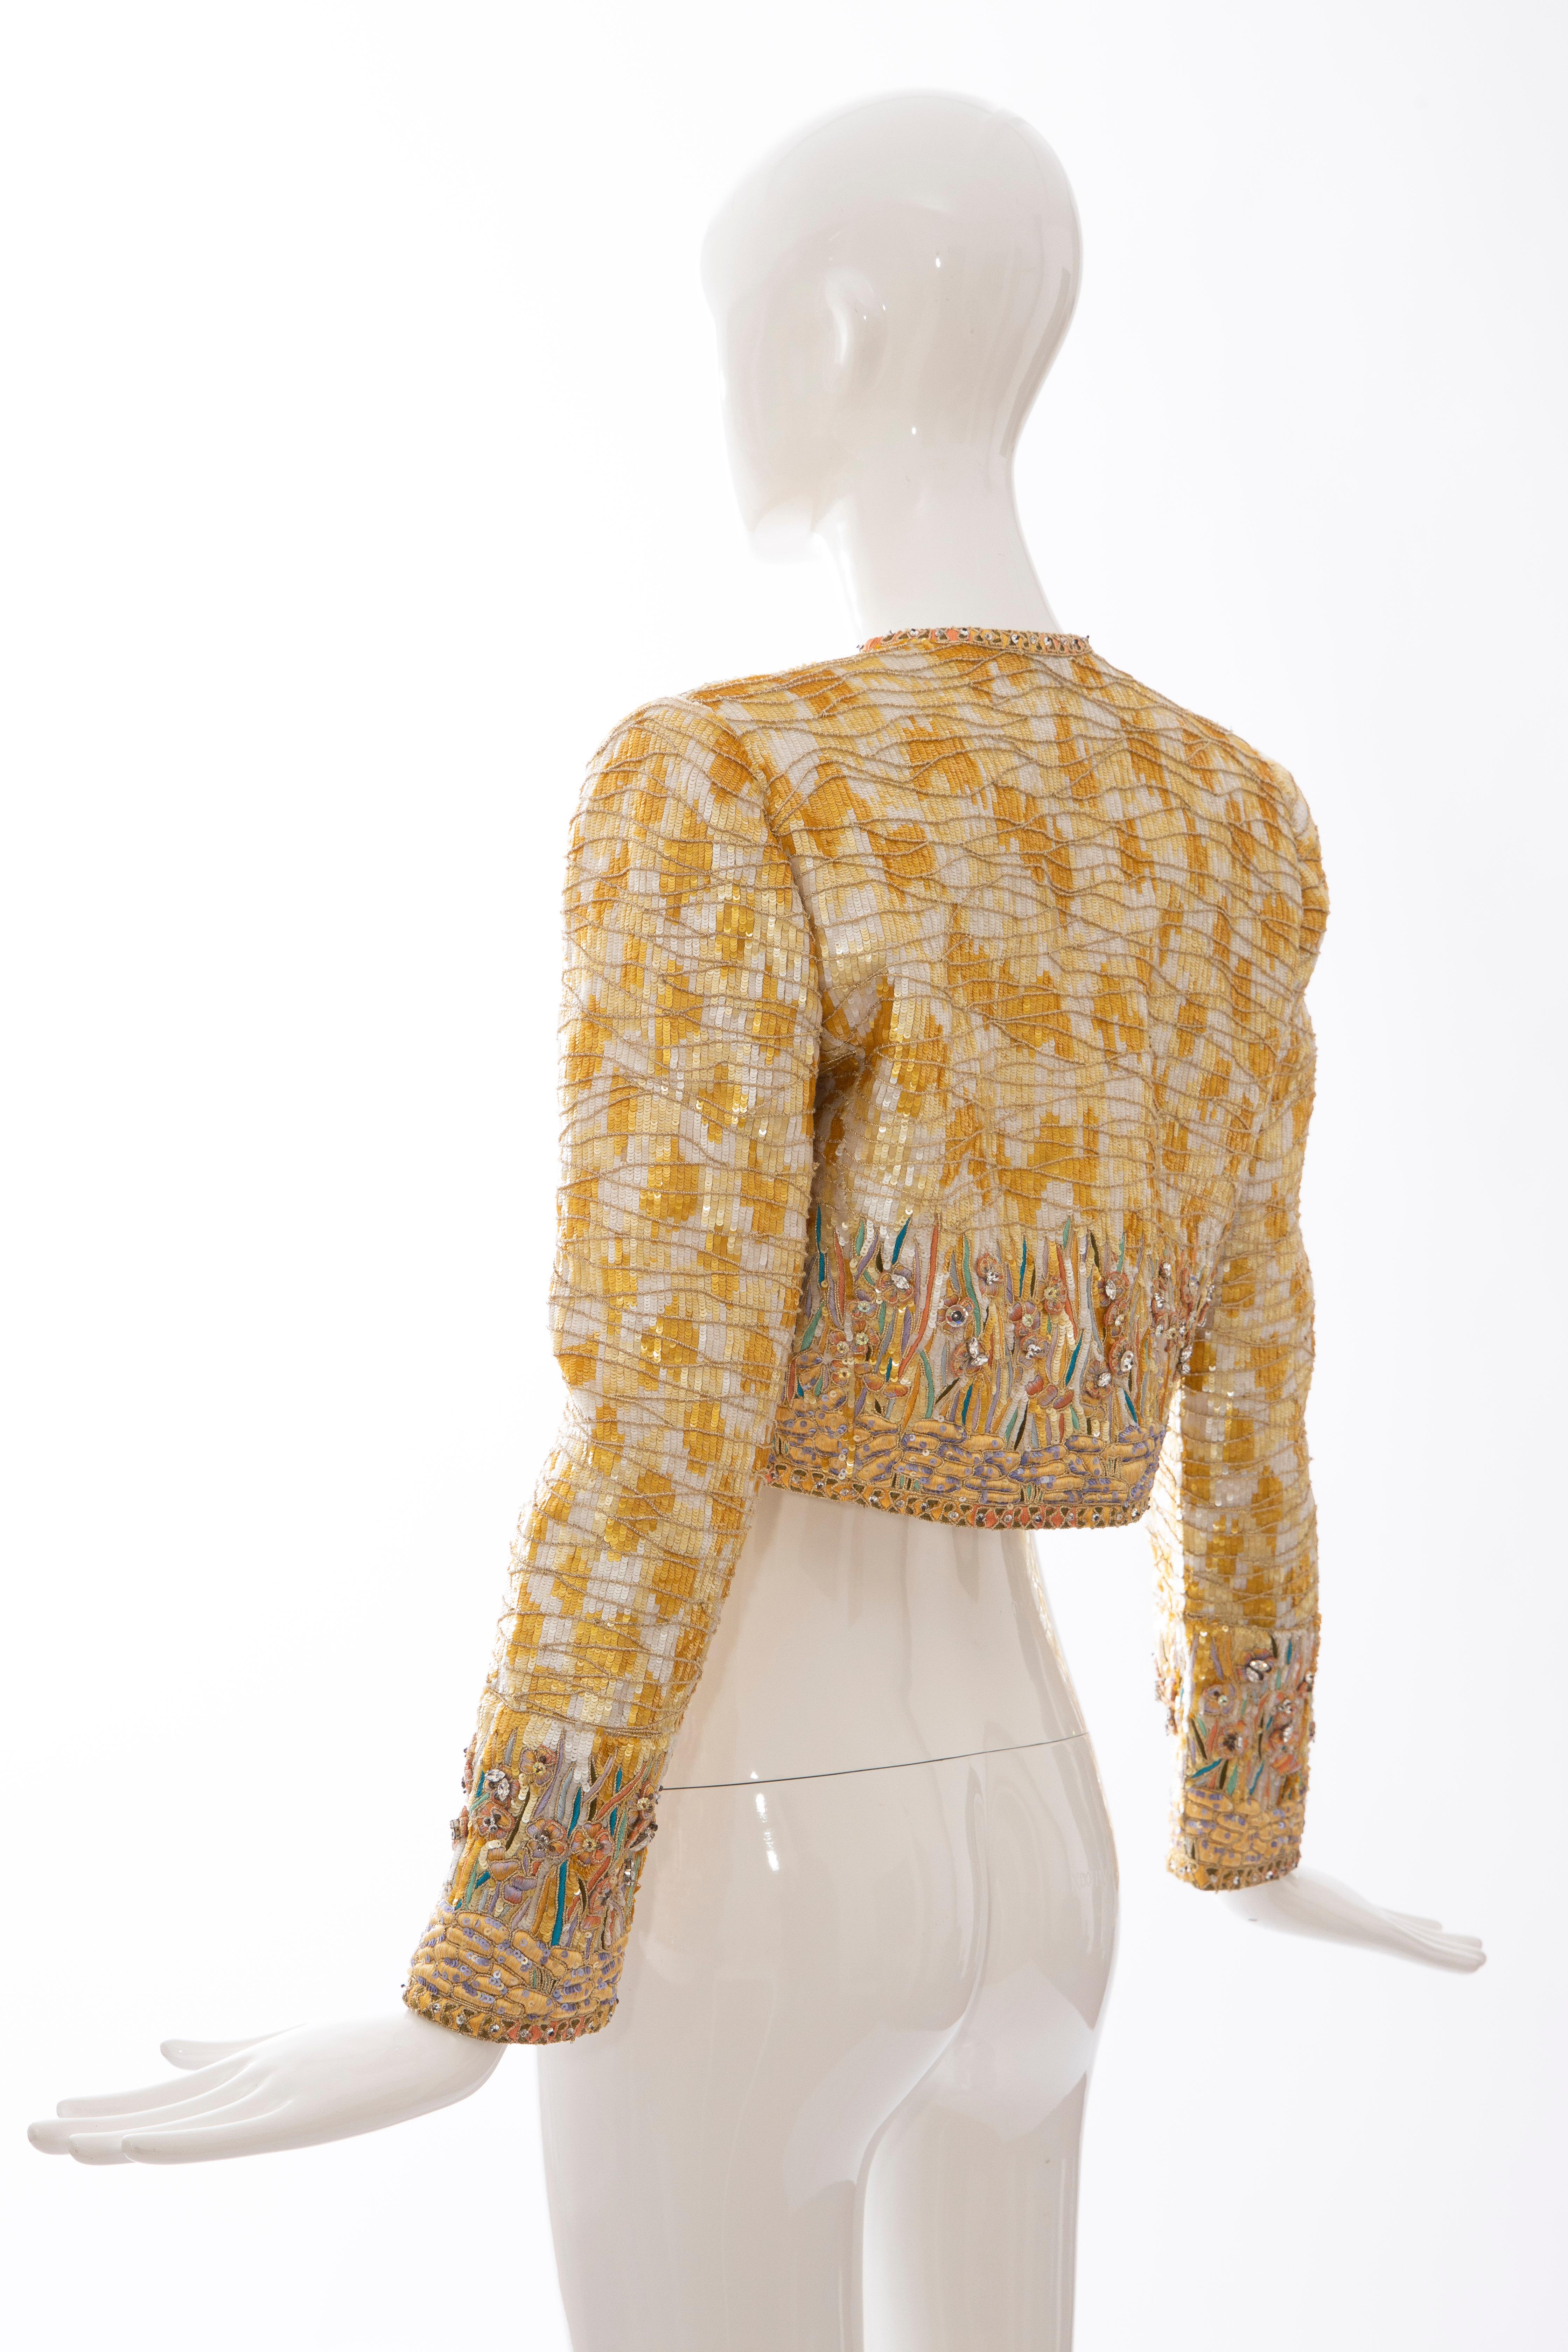 Mary McFadden Couture Silk Embroidered Sequins Diamanté Bolero Jacket, ca. 1980's For Sale 3